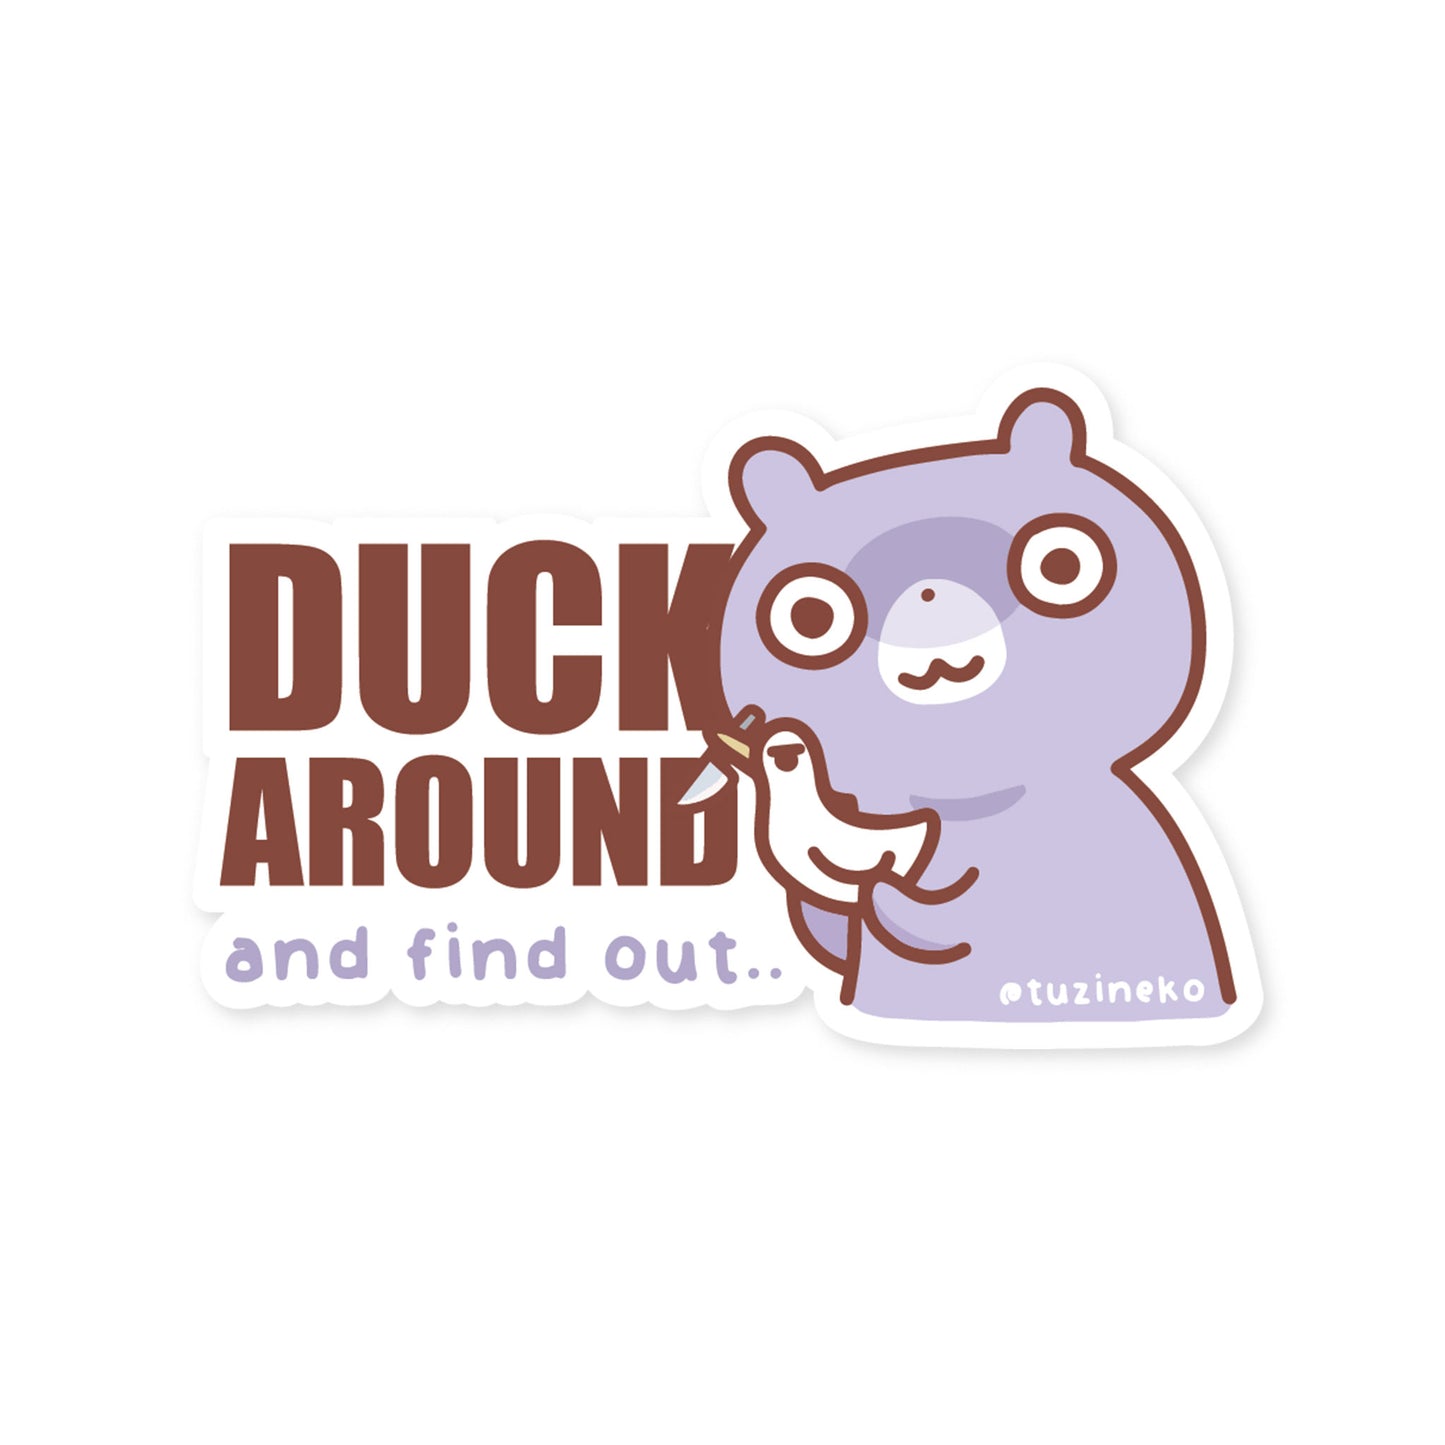 Scary Gom "Duck Around And Find Out" Matte Waterproof Sticker with Gloss Spot UV